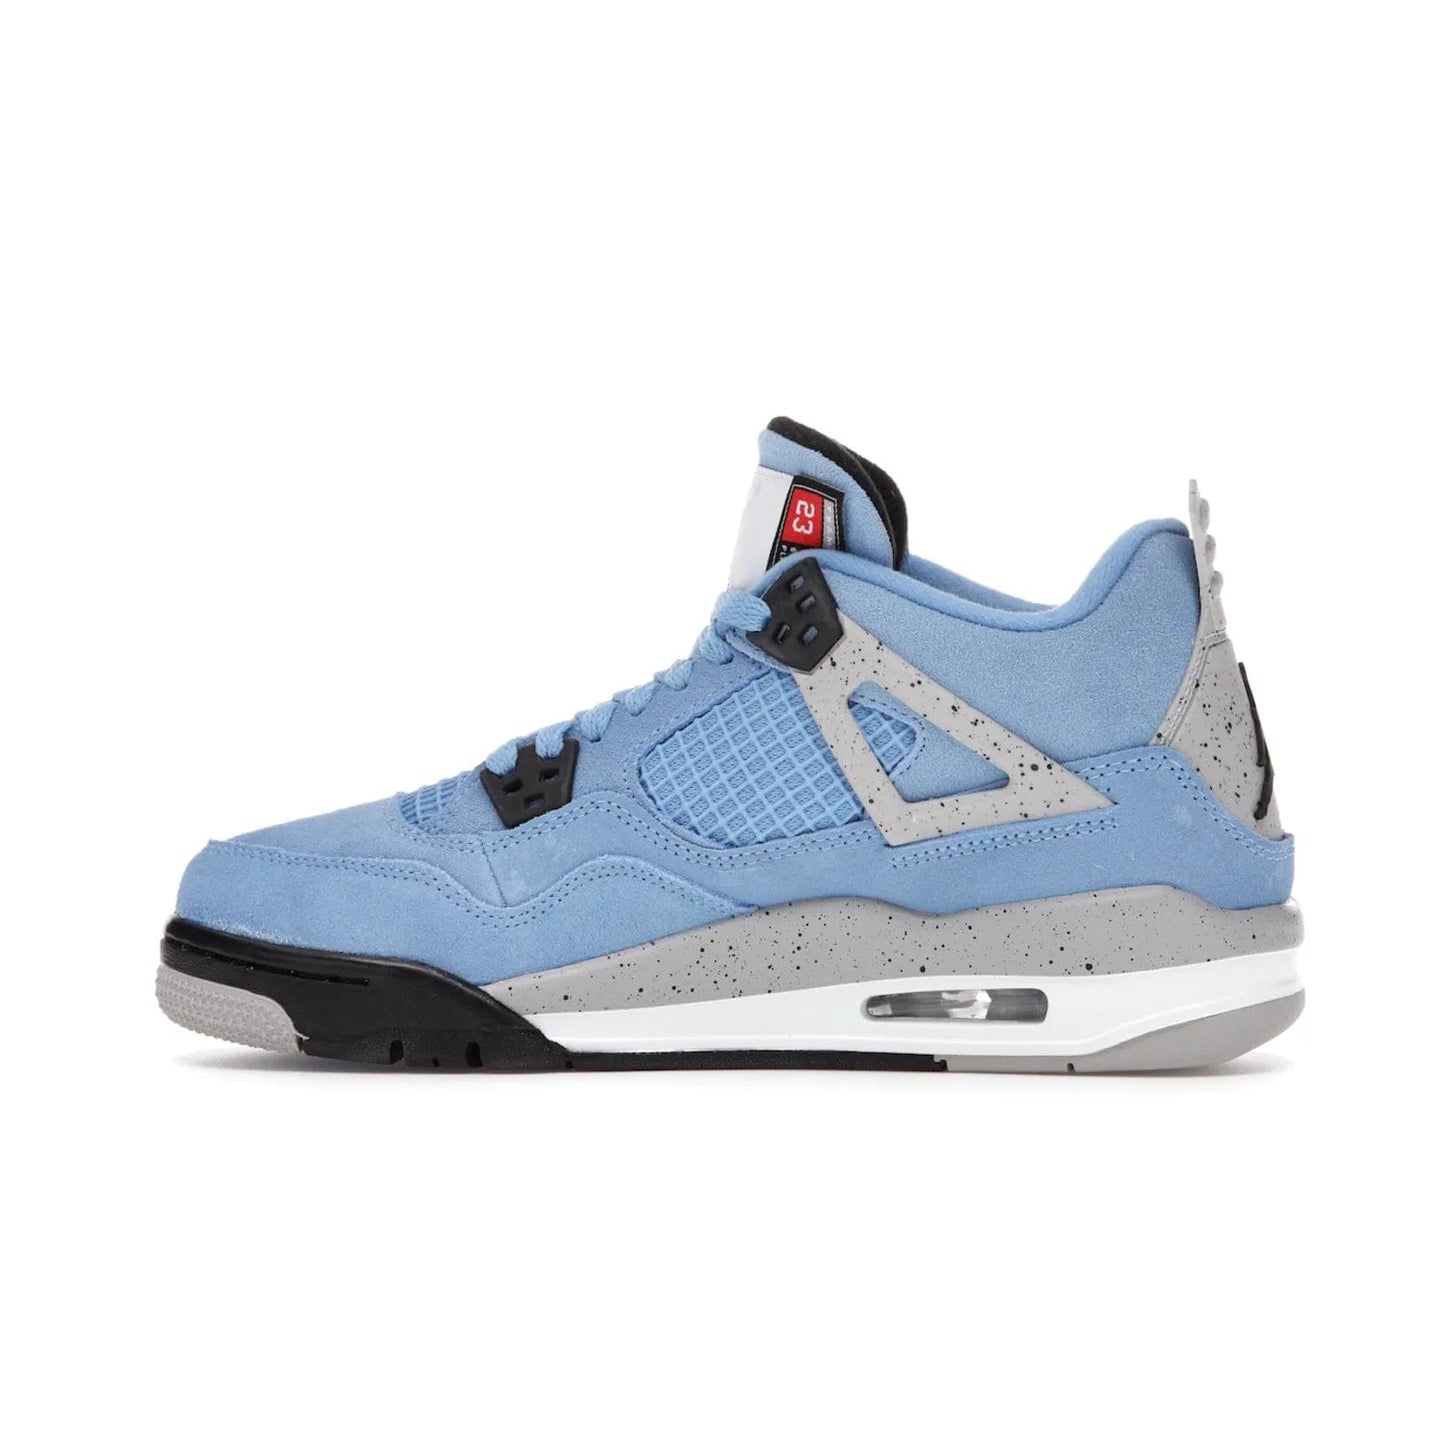 Jordan 4 Retro University Blue (GS) - Image 20 - Only at www.BallersClubKickz.com - Air Jordan 4 Retro University Blue GS: Classic silhouette and vibrant colors. Featuring a suede upper and Jumpman icon, this grade school-size shoe is perfect for collections and retails at $150.